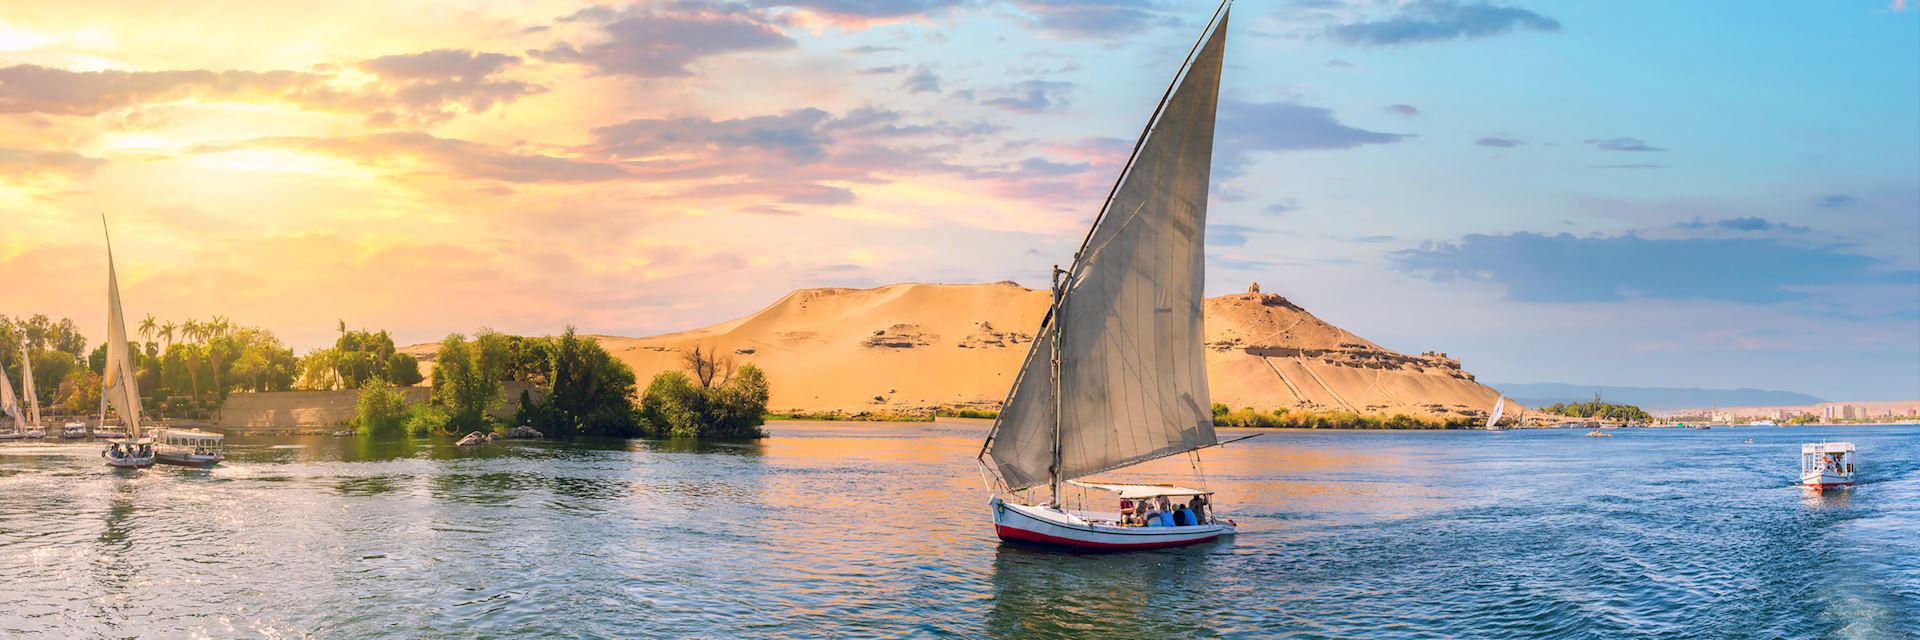 Traditional felucca on the Nile